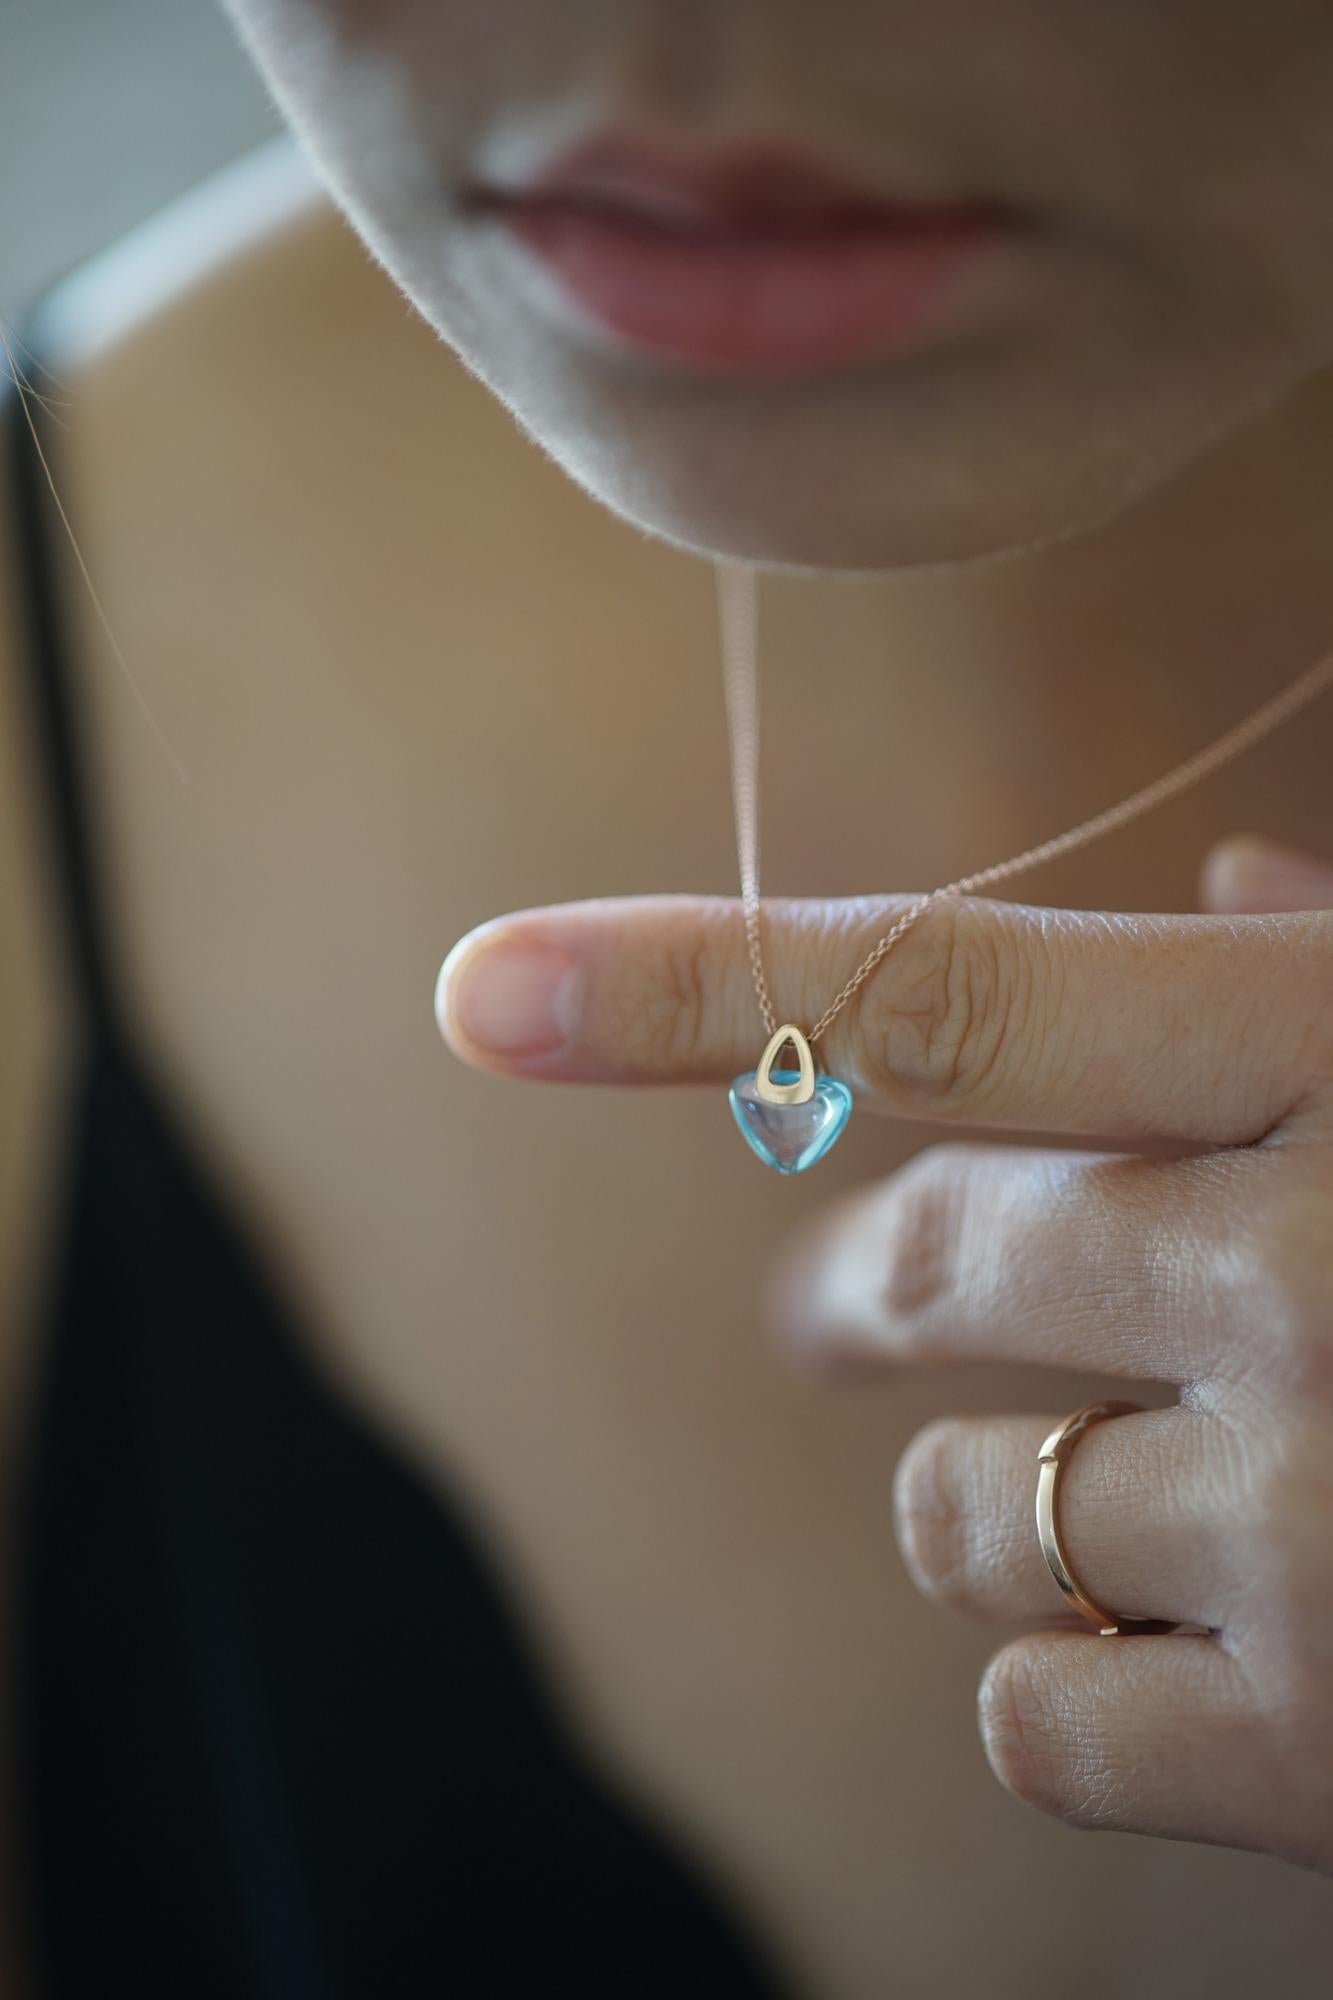 Rebecca Li designs mindfulness. 
This design is from her Luck Rock Collection.

Talisman Pendant :
18K Rose Gold
Natural Blue Topaz
Pendant Size: 9 mm W * 6 mm D * 18 mm H
Gemstone Size:  8 mm W * 6 mm D * 9 mm H

Chain: 
18K Rose Gold
Adjustable